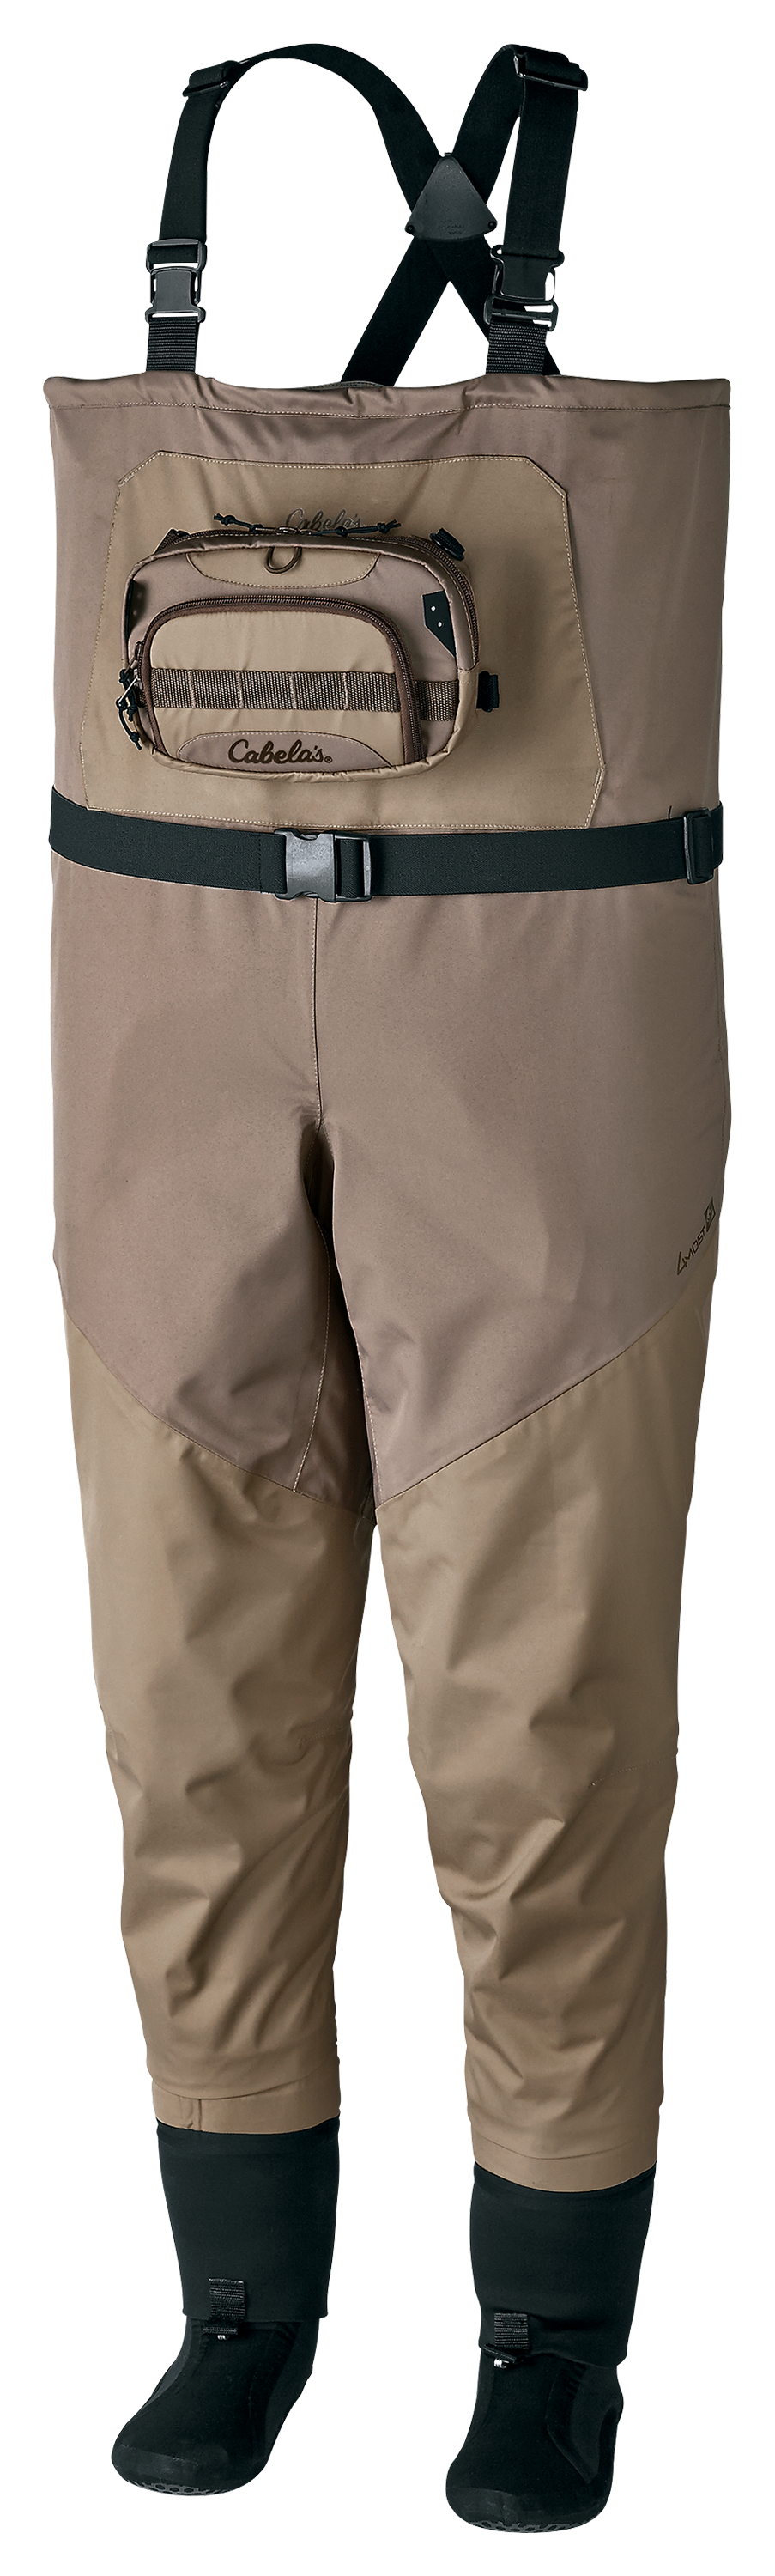 Cabela's Guidetech Stocking-Foot Fishing Waders for Men